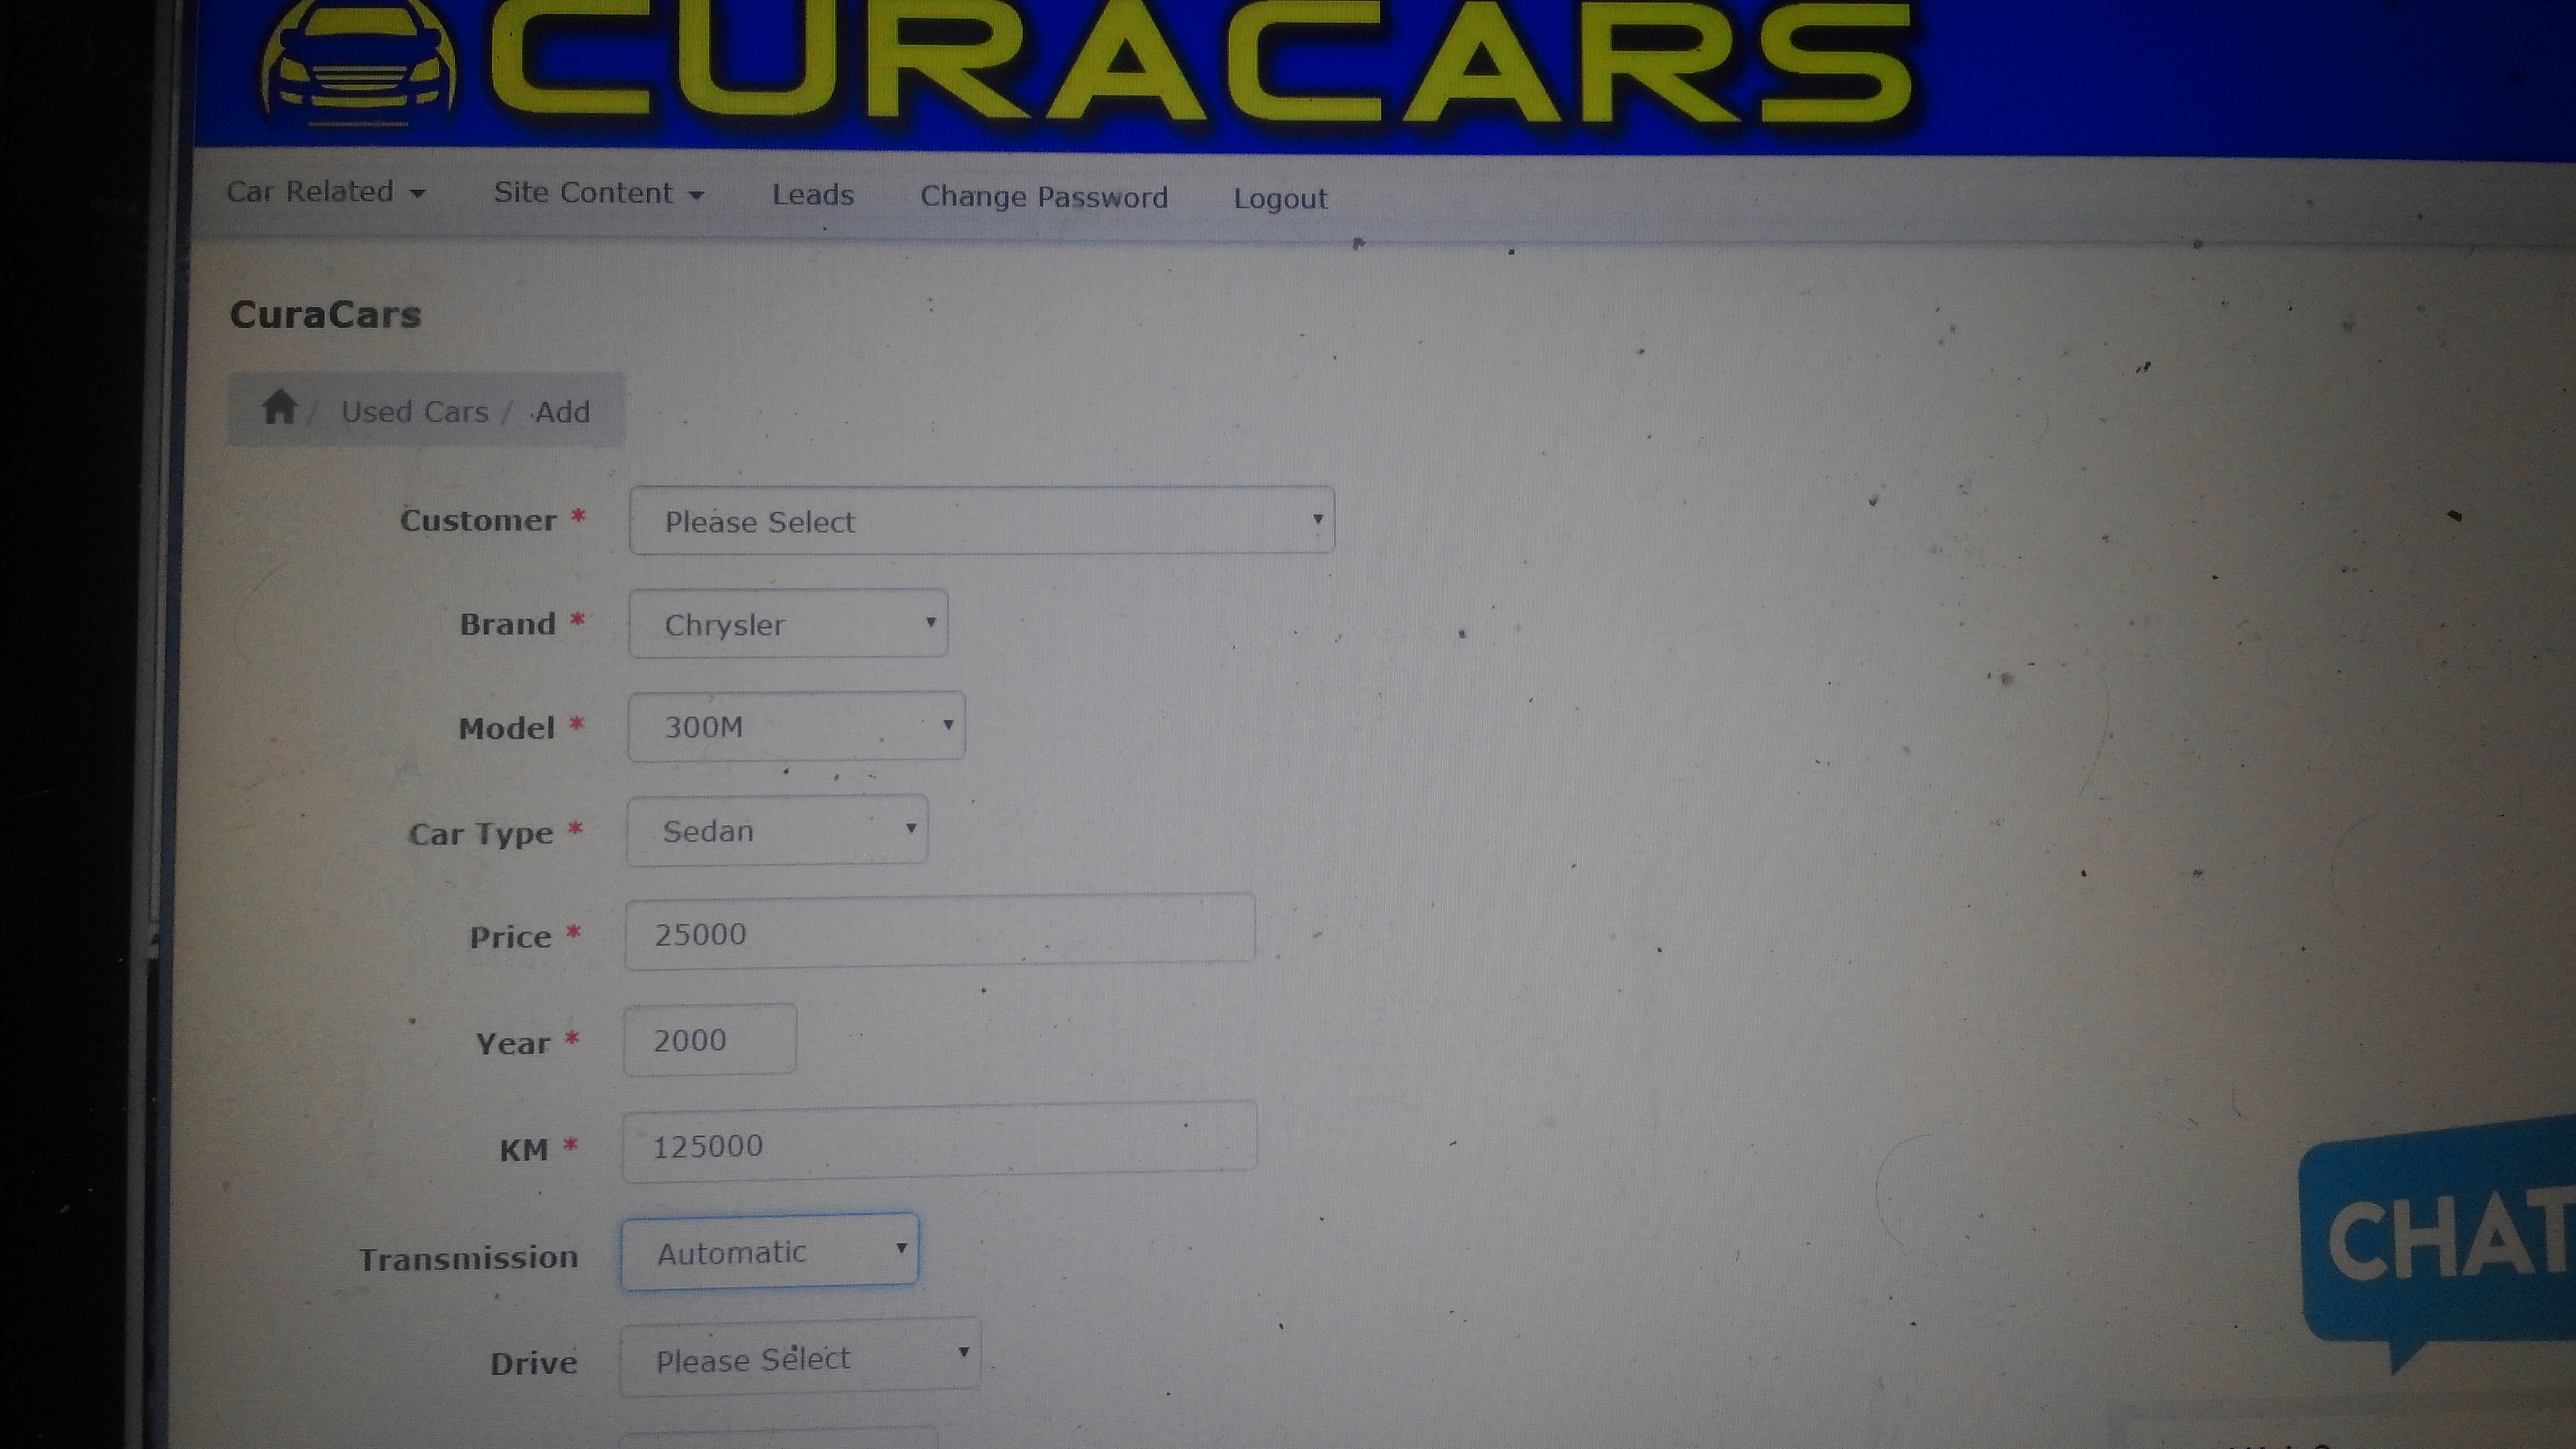 CuraCars Back-end updated